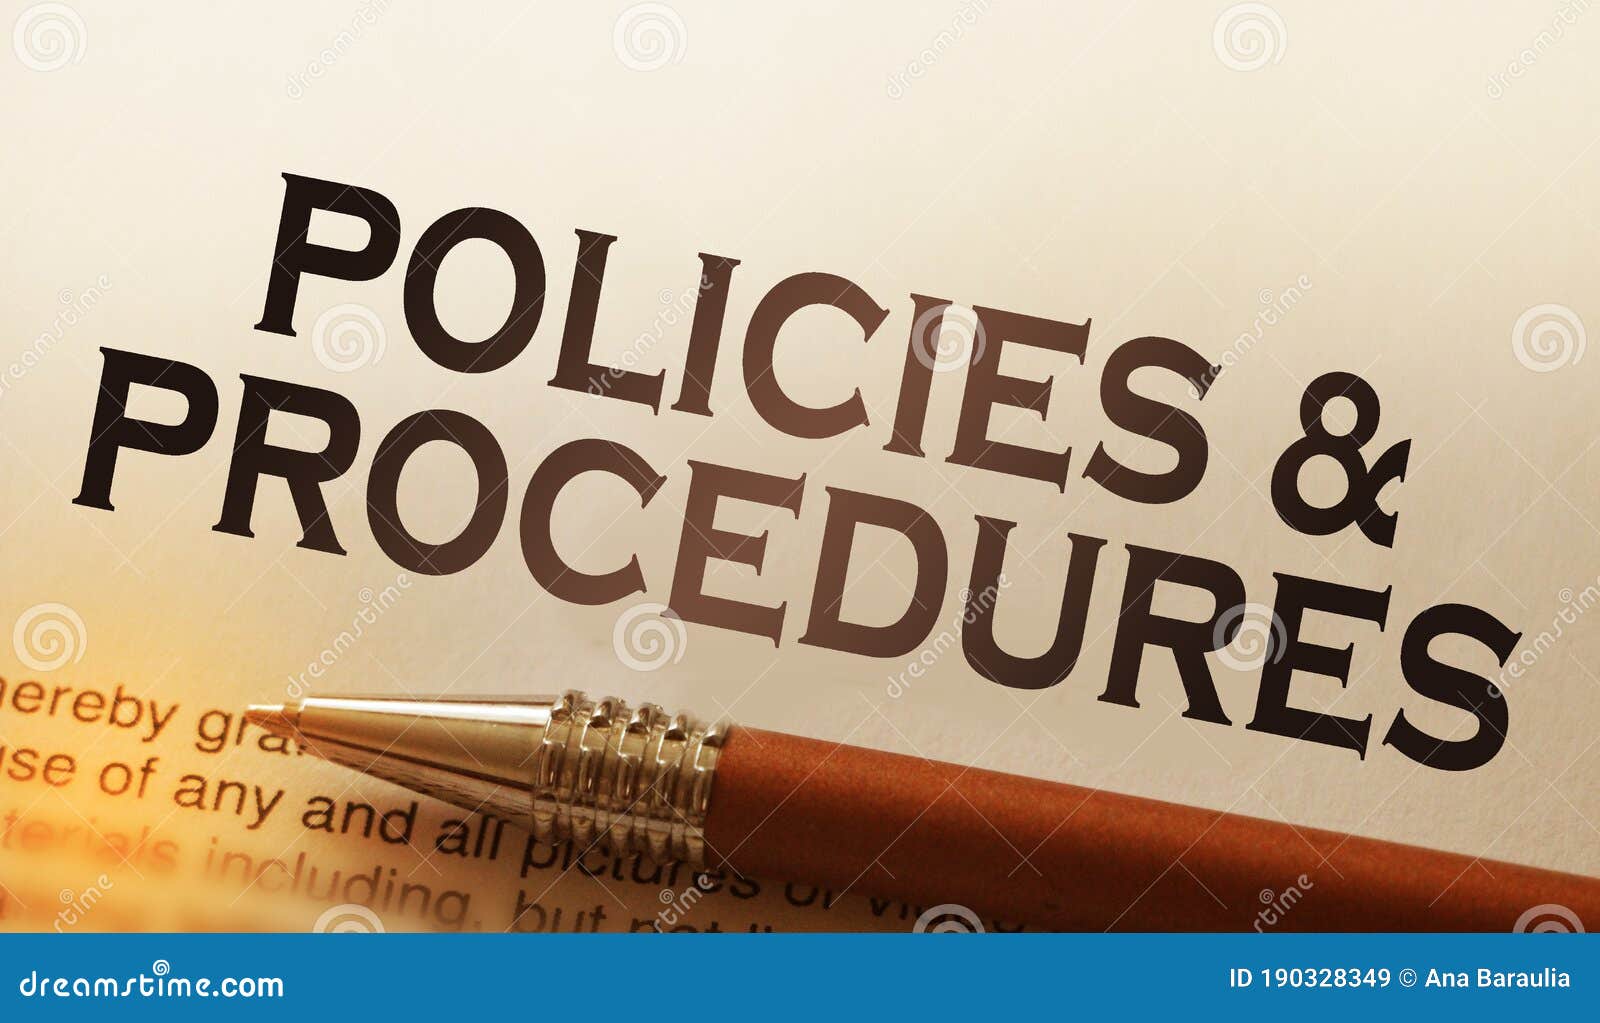 policies and procedures memo on notebook with pen. business concept